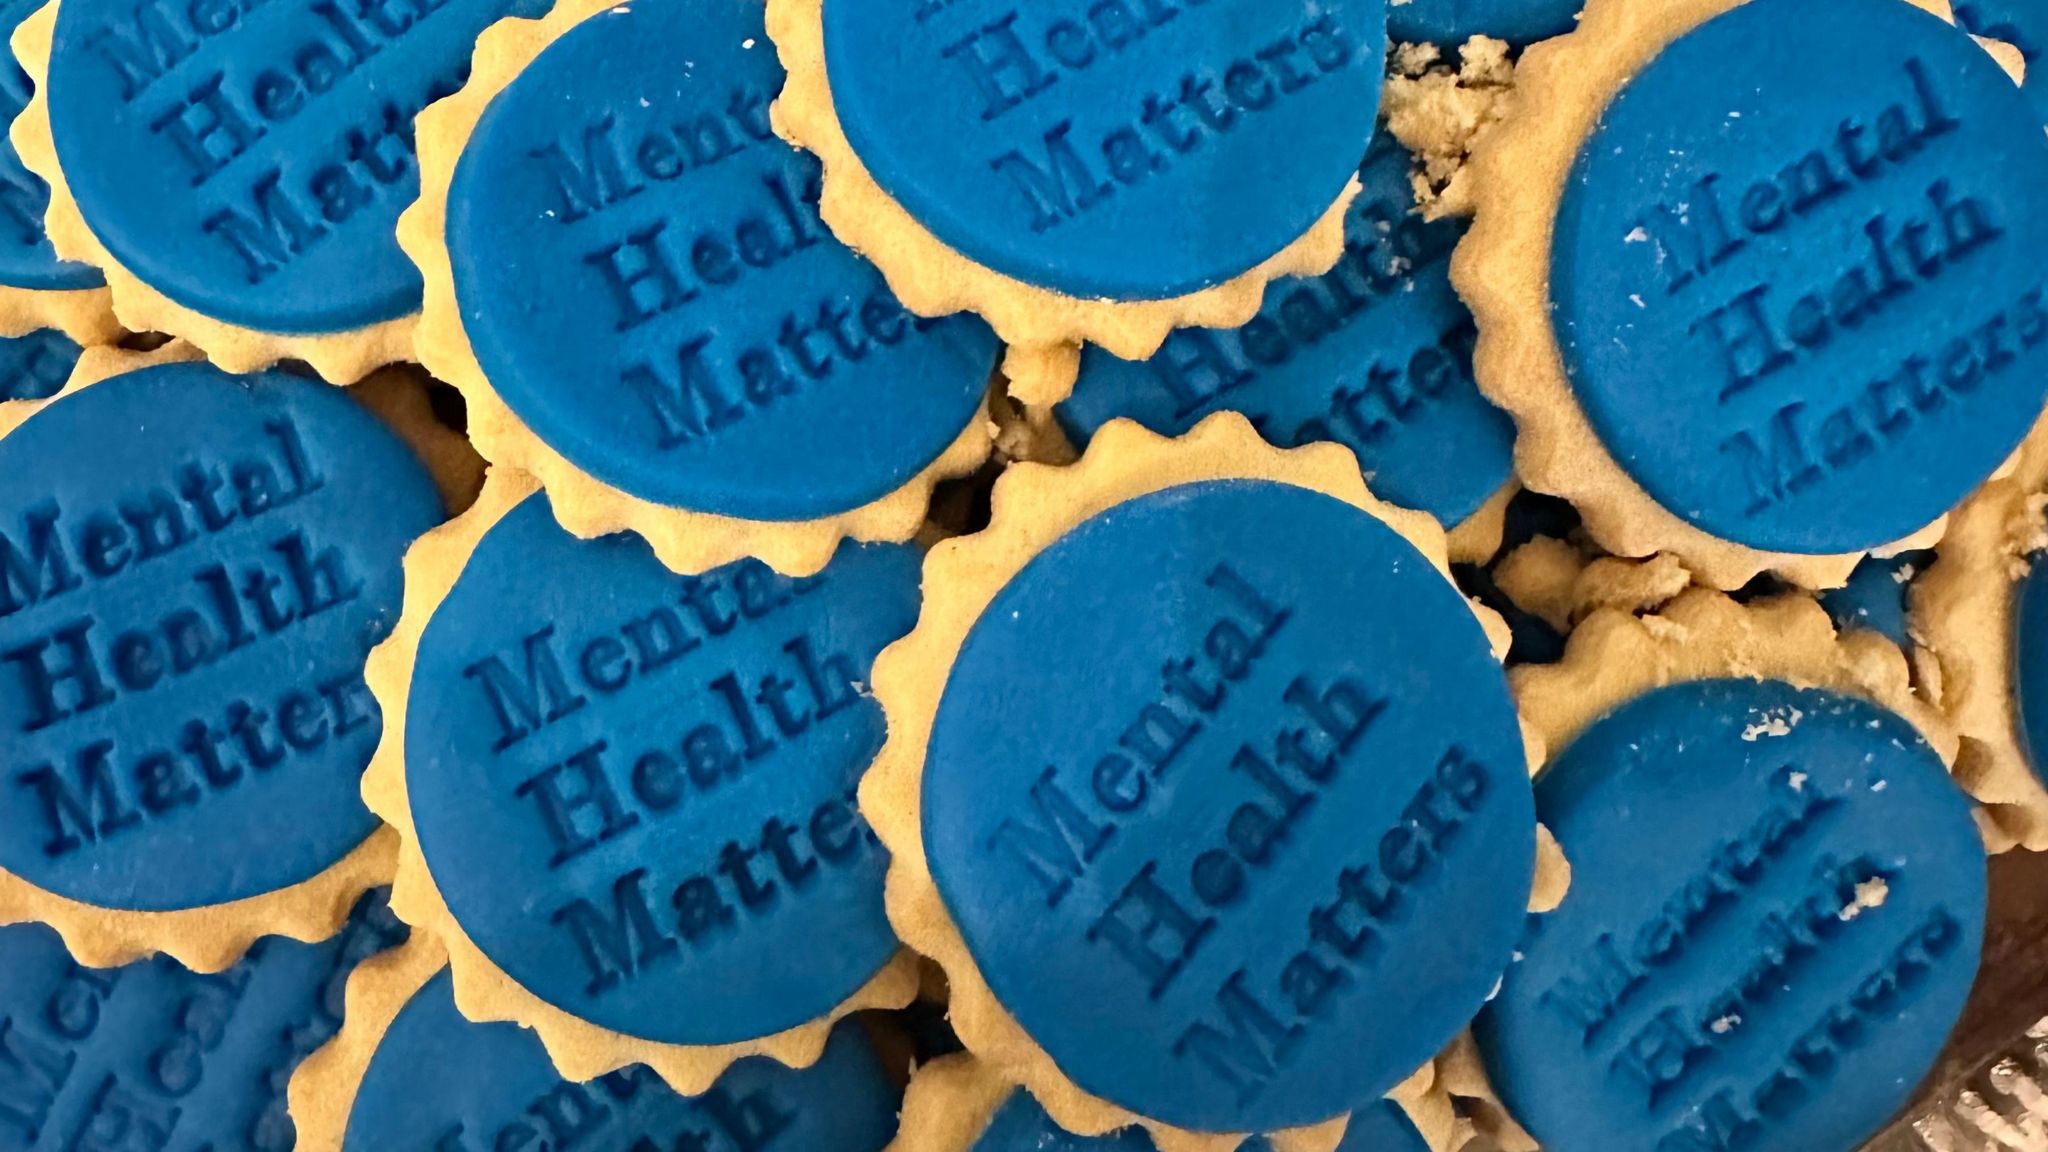 Biscuits embellished with the phrase 'Mental Health Matters'